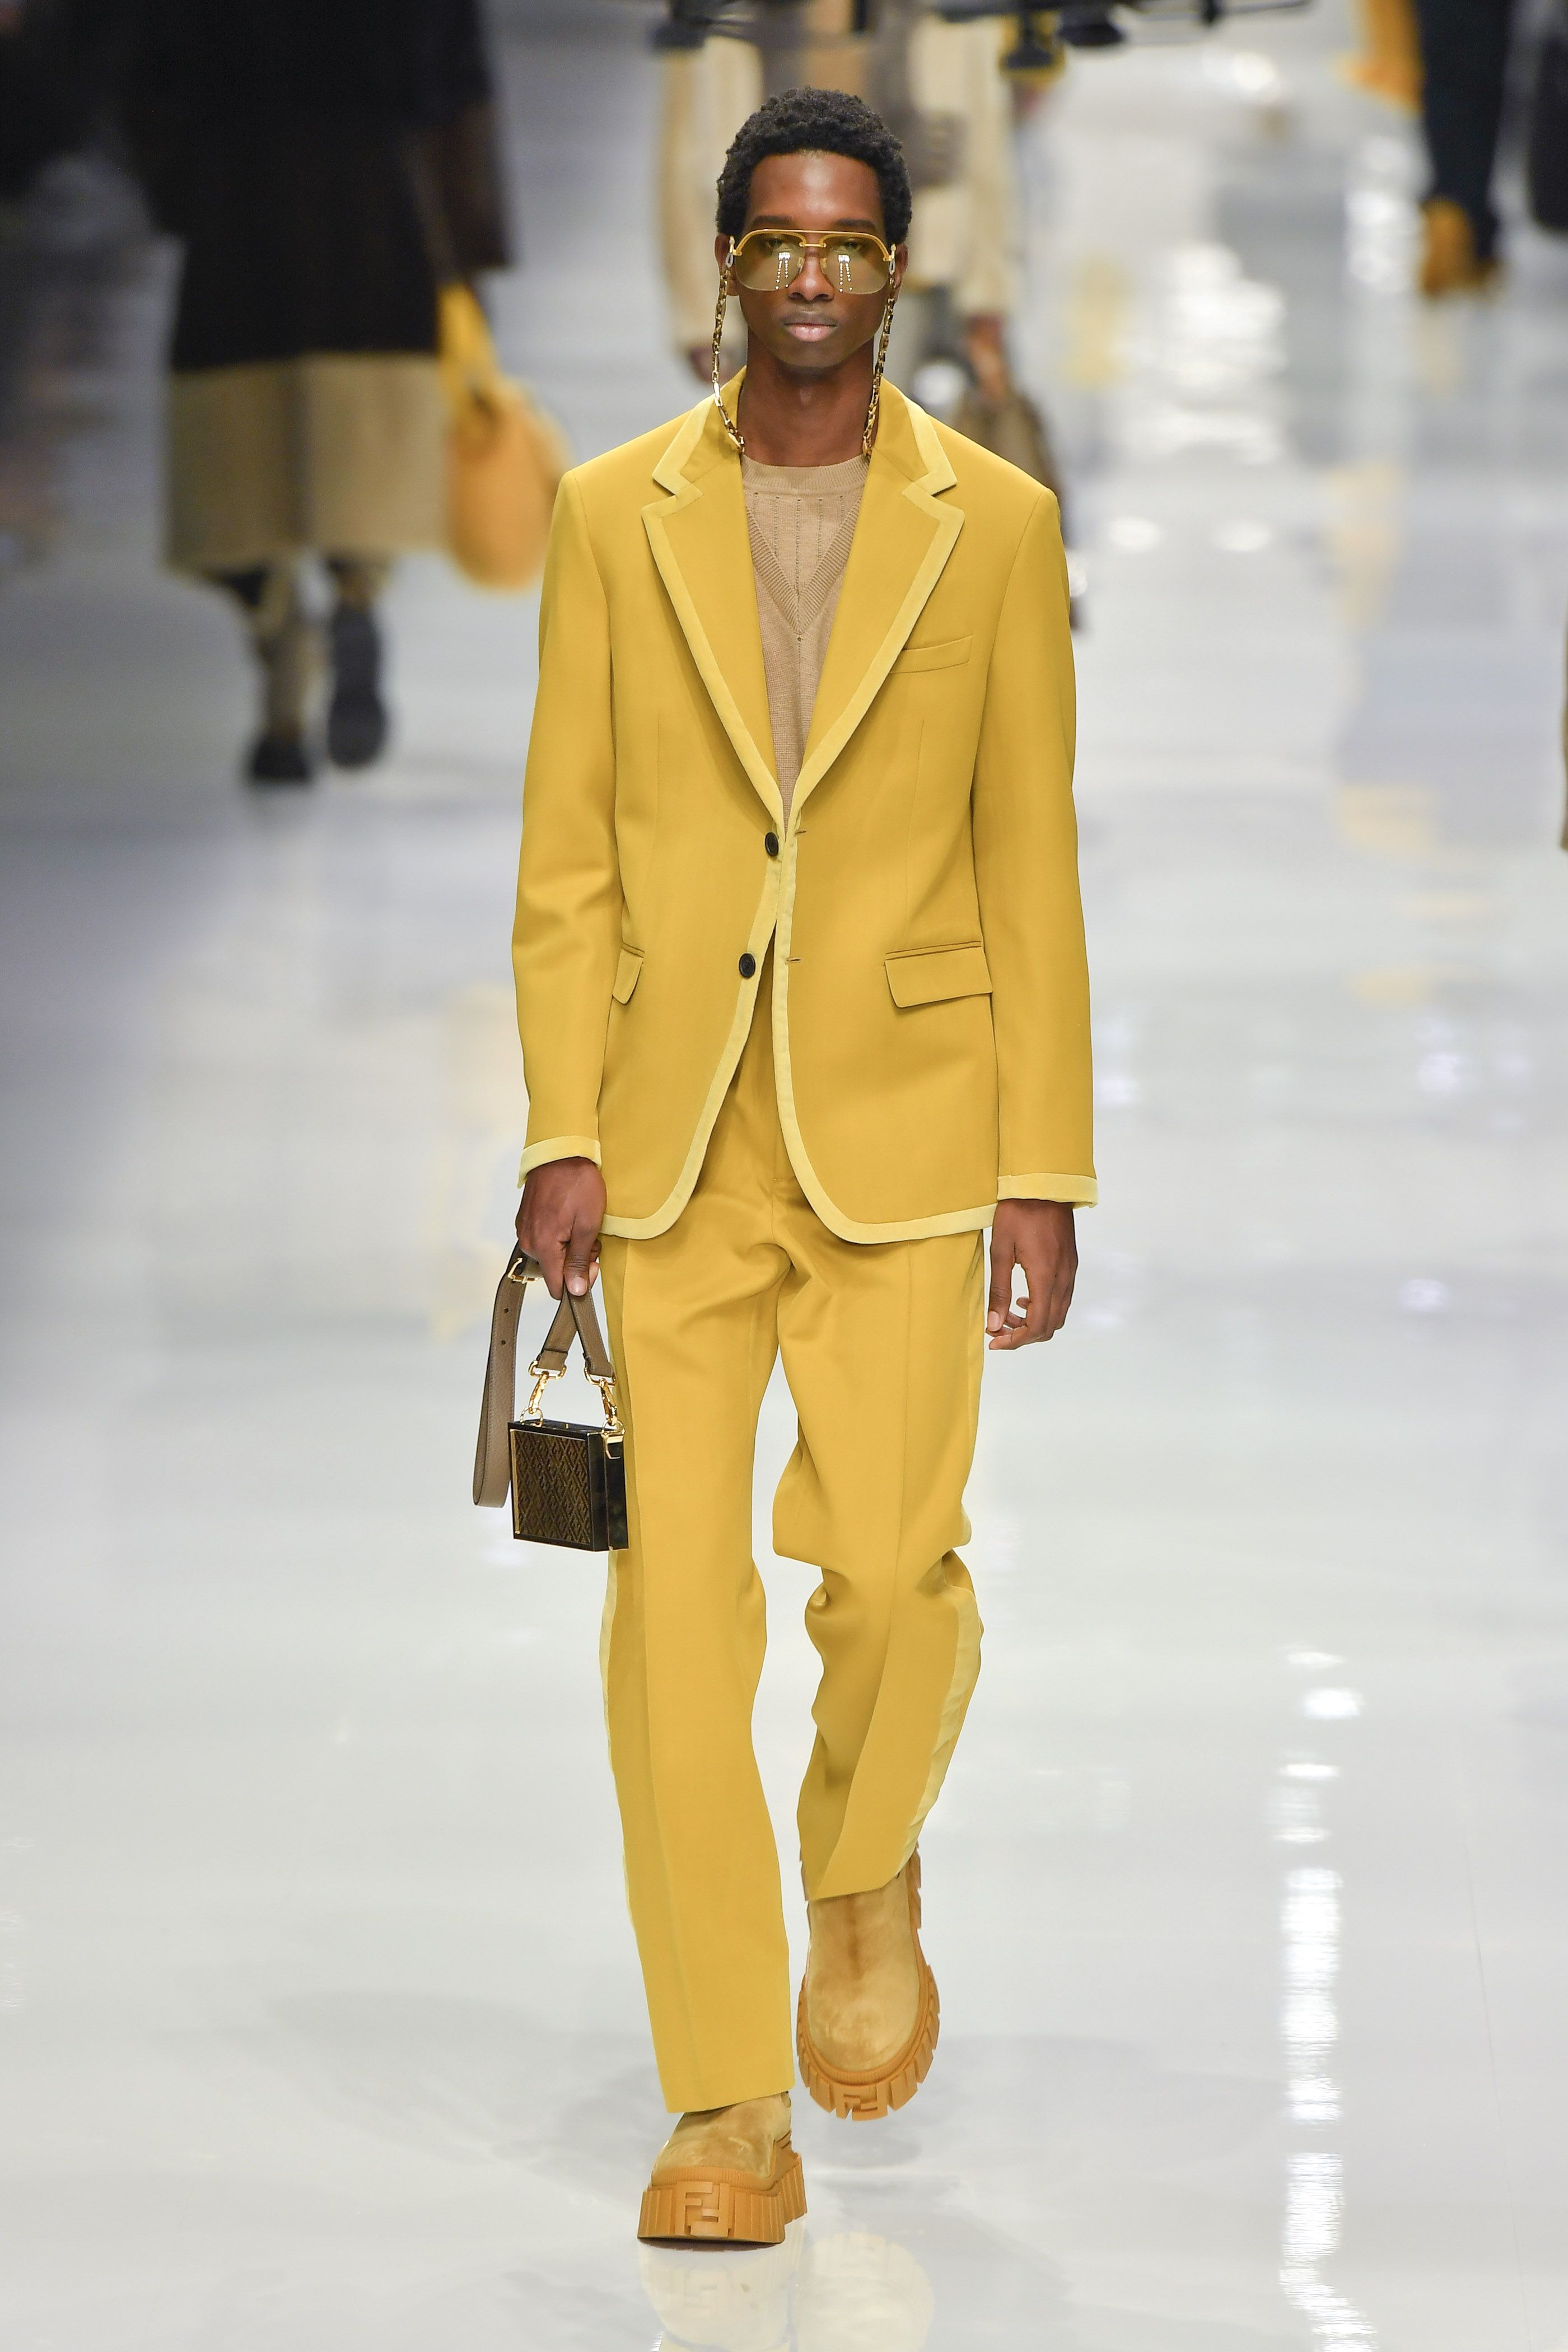 fendi outfit for men